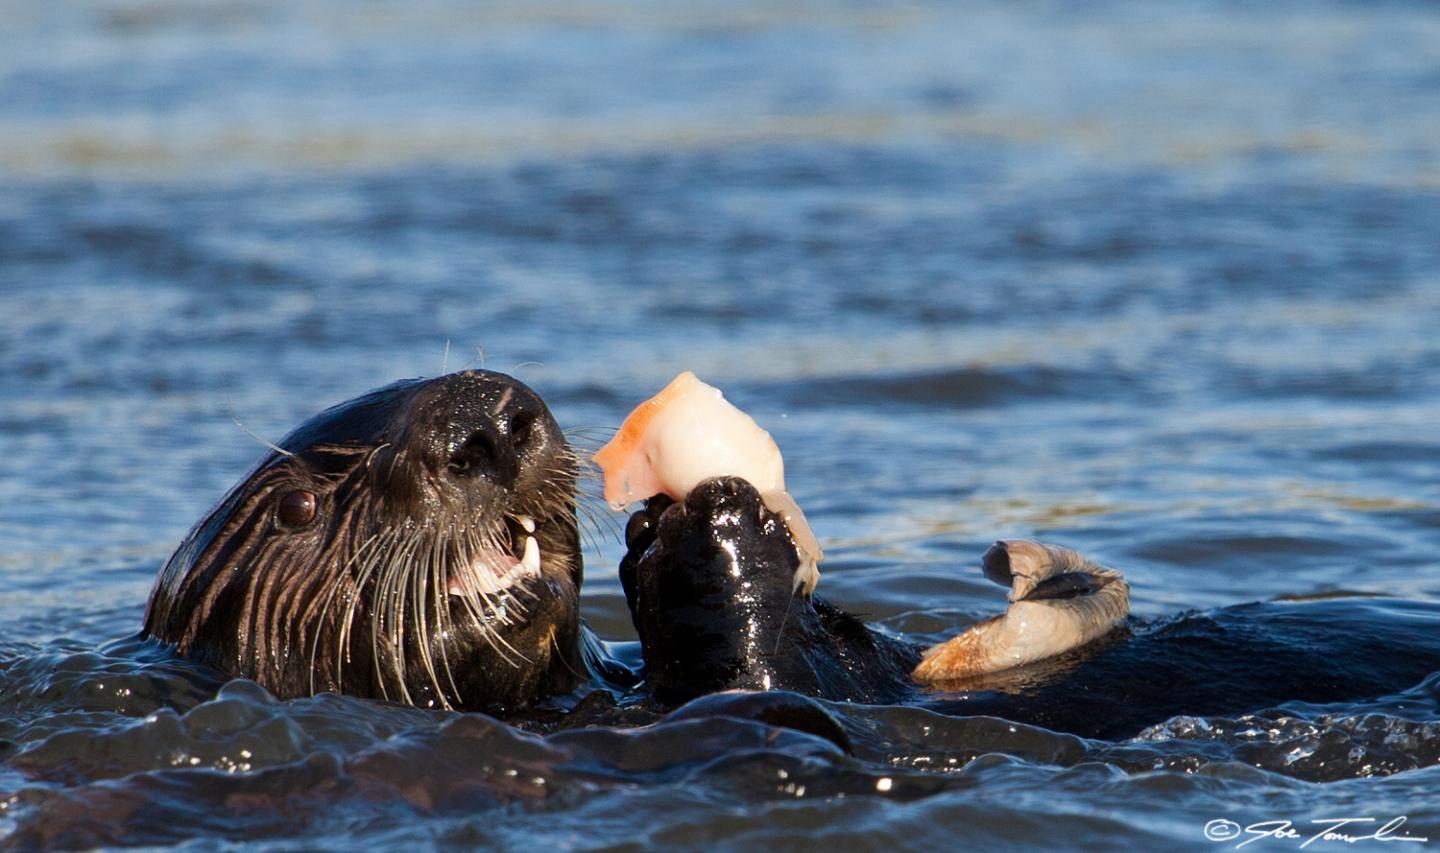 Sea otter with clam